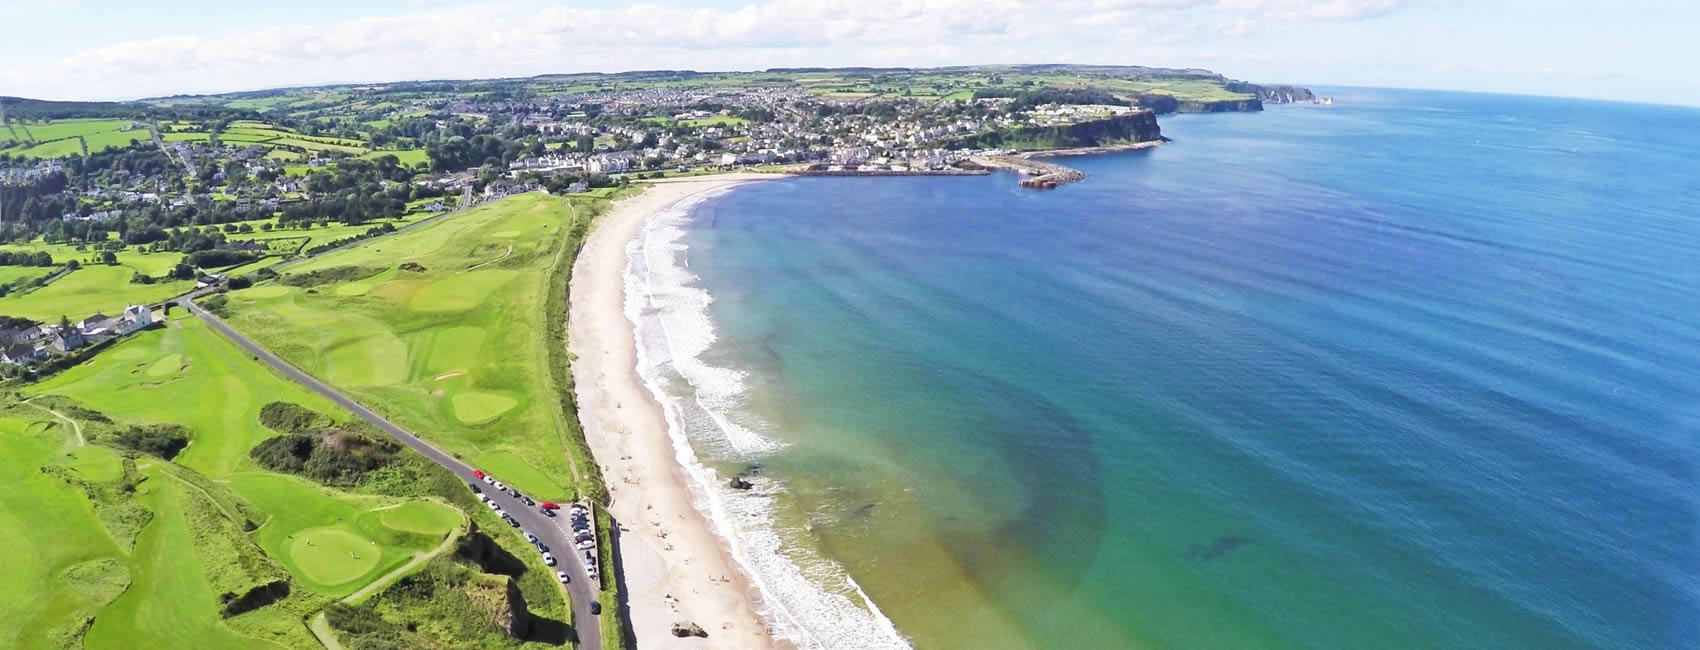 Ballycastle beach and town in Northern Ireland